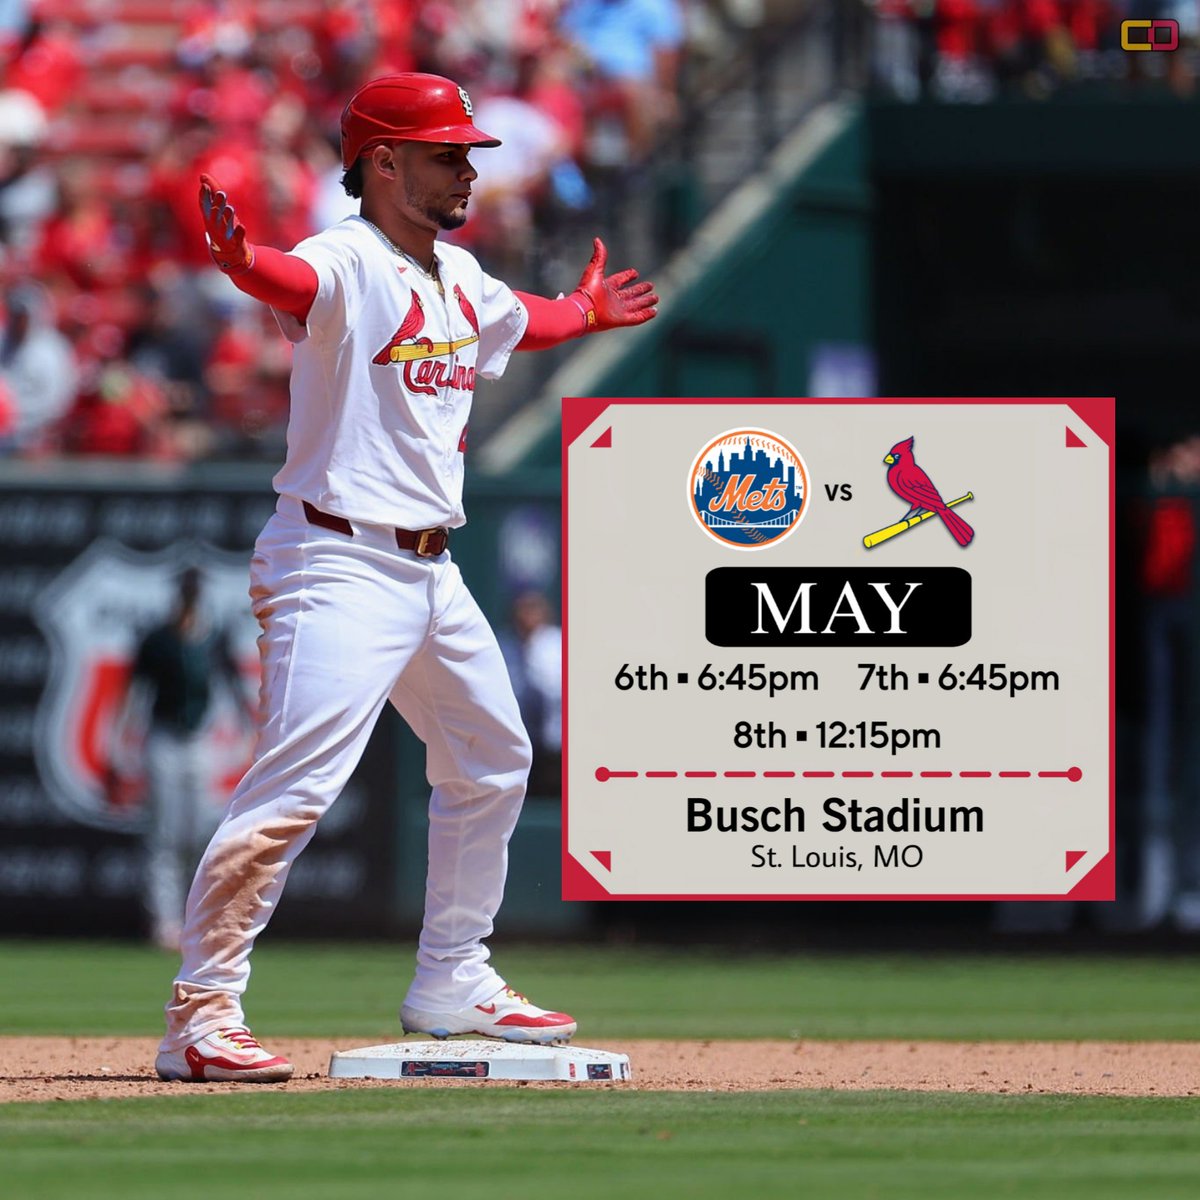 The Cardinals homestand continues with 3 against the Mets.